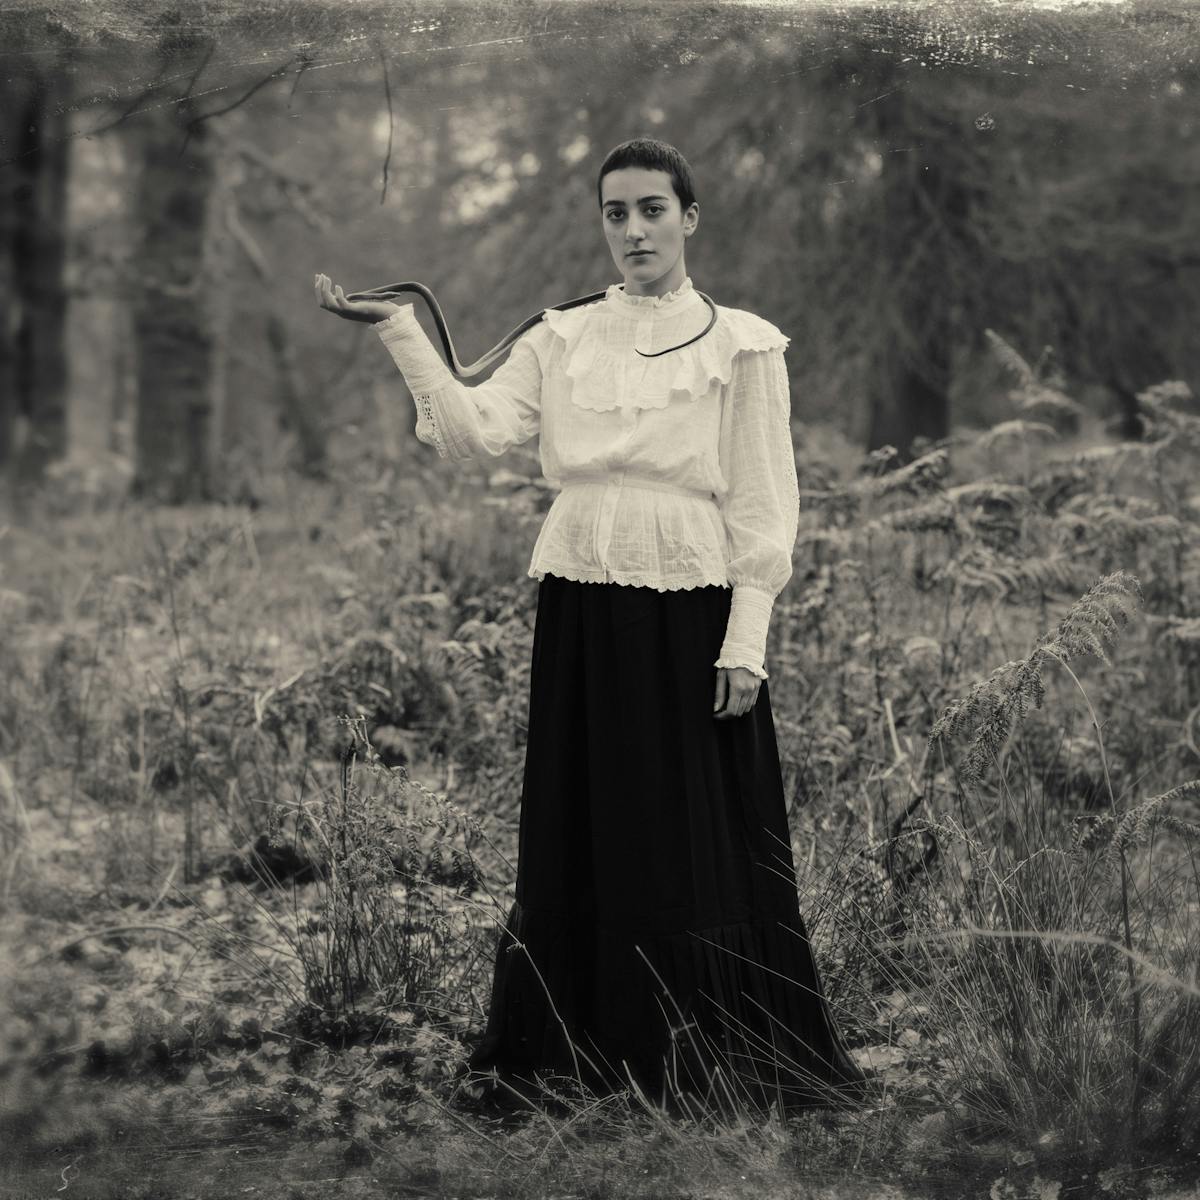 Sepia toned photograph with a digital filter applied to give the impression the photograph was created using a glass-plate process from the mid 19th century. The effect of this filter includes scratches and fingerprints. The photograph shows a woodland scene made up of tall grasses, bracken and distant trees. In the centre of the image stands a tall woman dressed in a black floor length skirt and a white blouse embellished with frills and large cuffs. She is looking straight to camera, her right arm is raised to her side, palm facing upwards. Wrapped around her neck and running over her shoulder and down to her open hand is a long dark toned snake. The centre of the frame is in sharp focus, but the edges descend quickly into a blur.